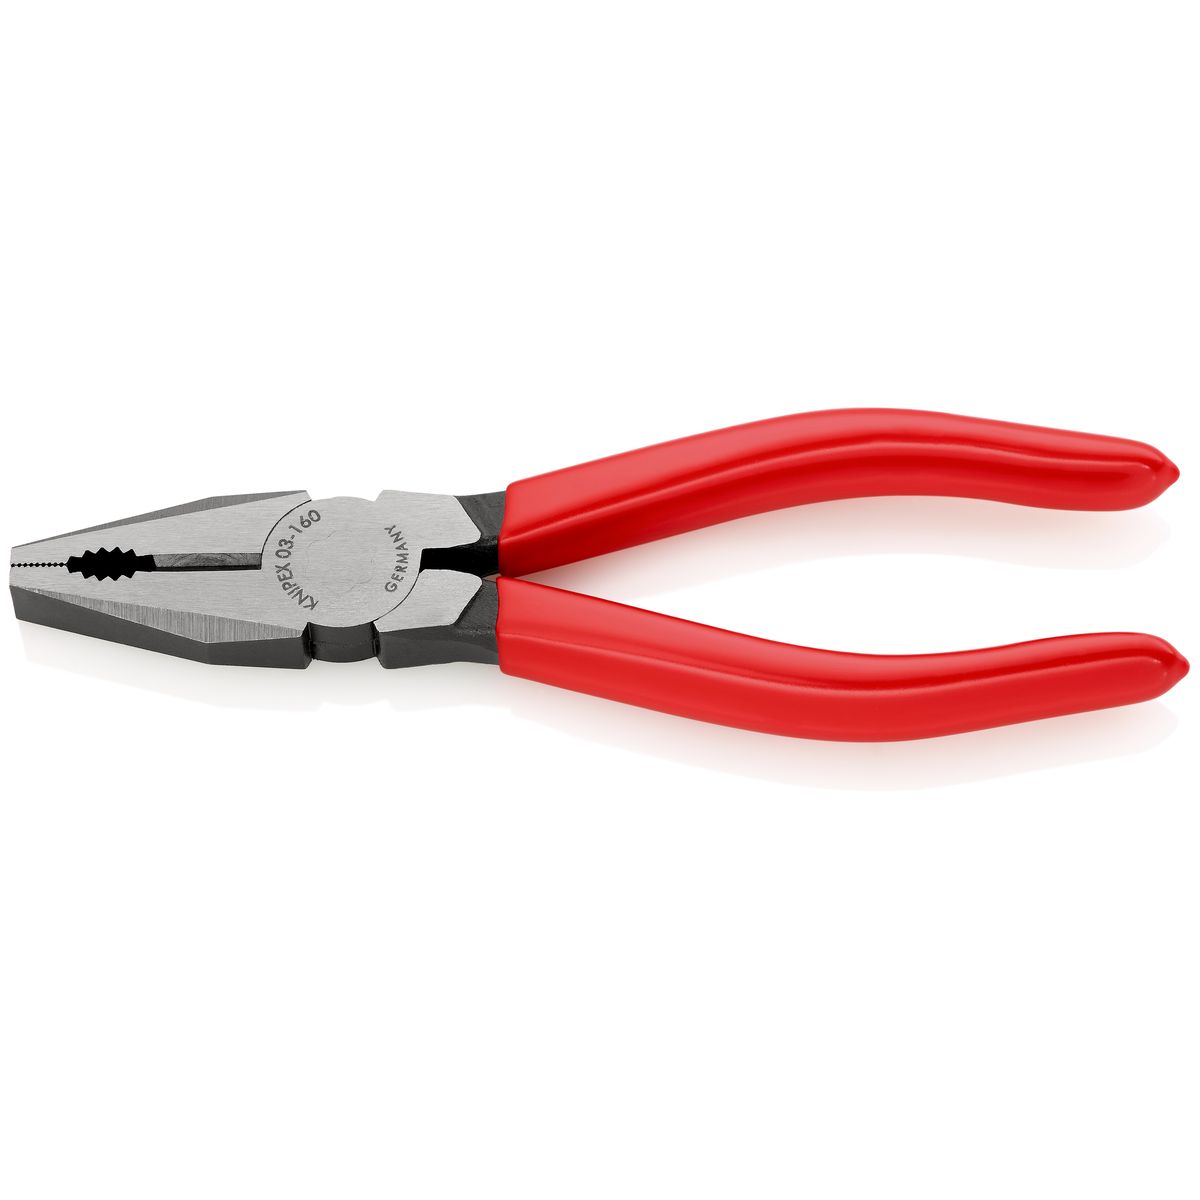 COMBINATION PLIERS 0301 160mm Knipex